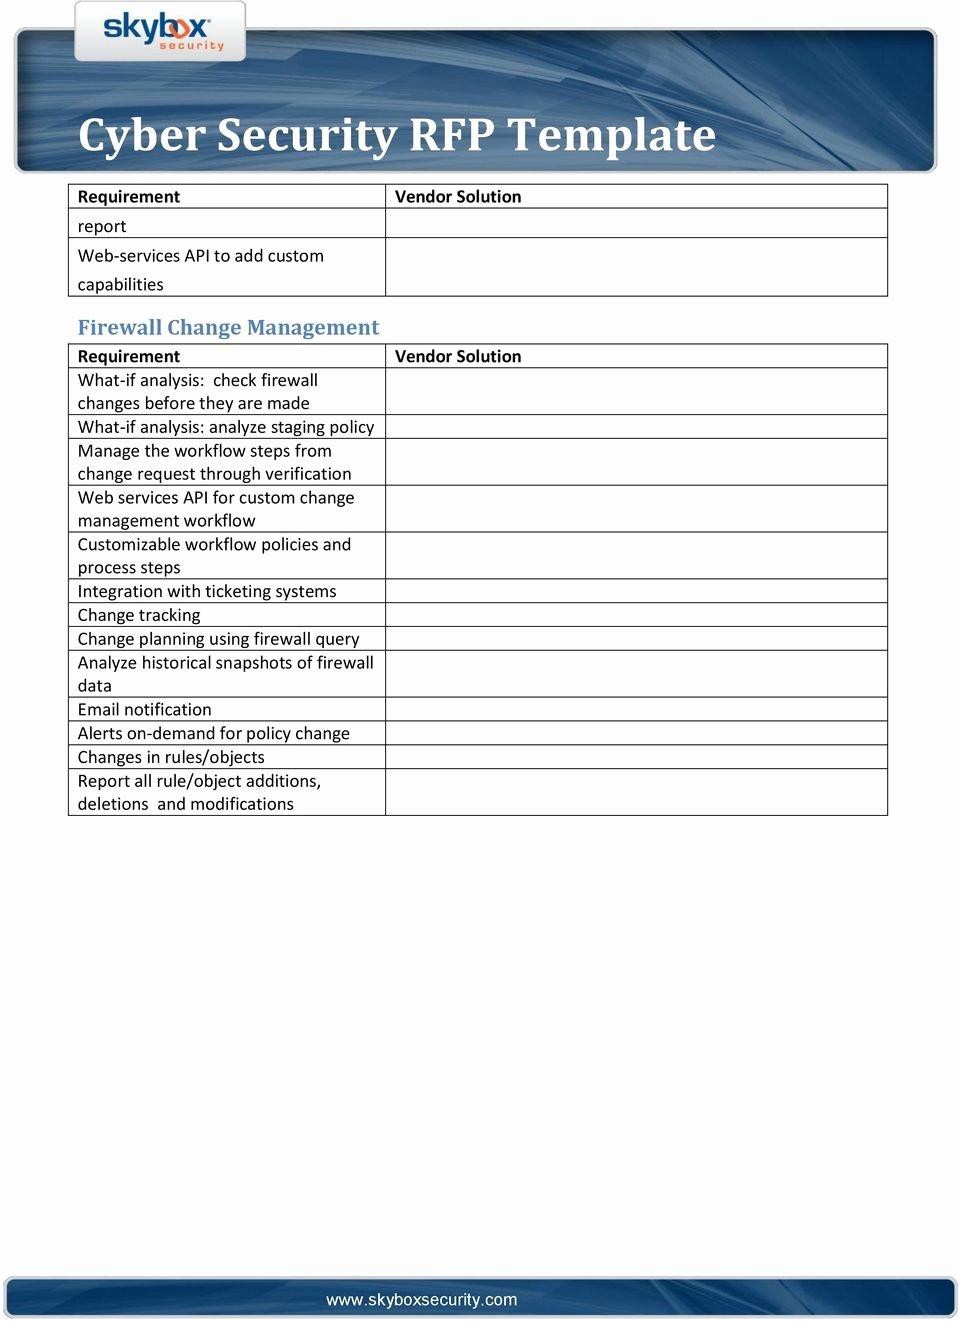 Cyber Security Policy Template Lovely Cyber Security Rfp Template Pdf